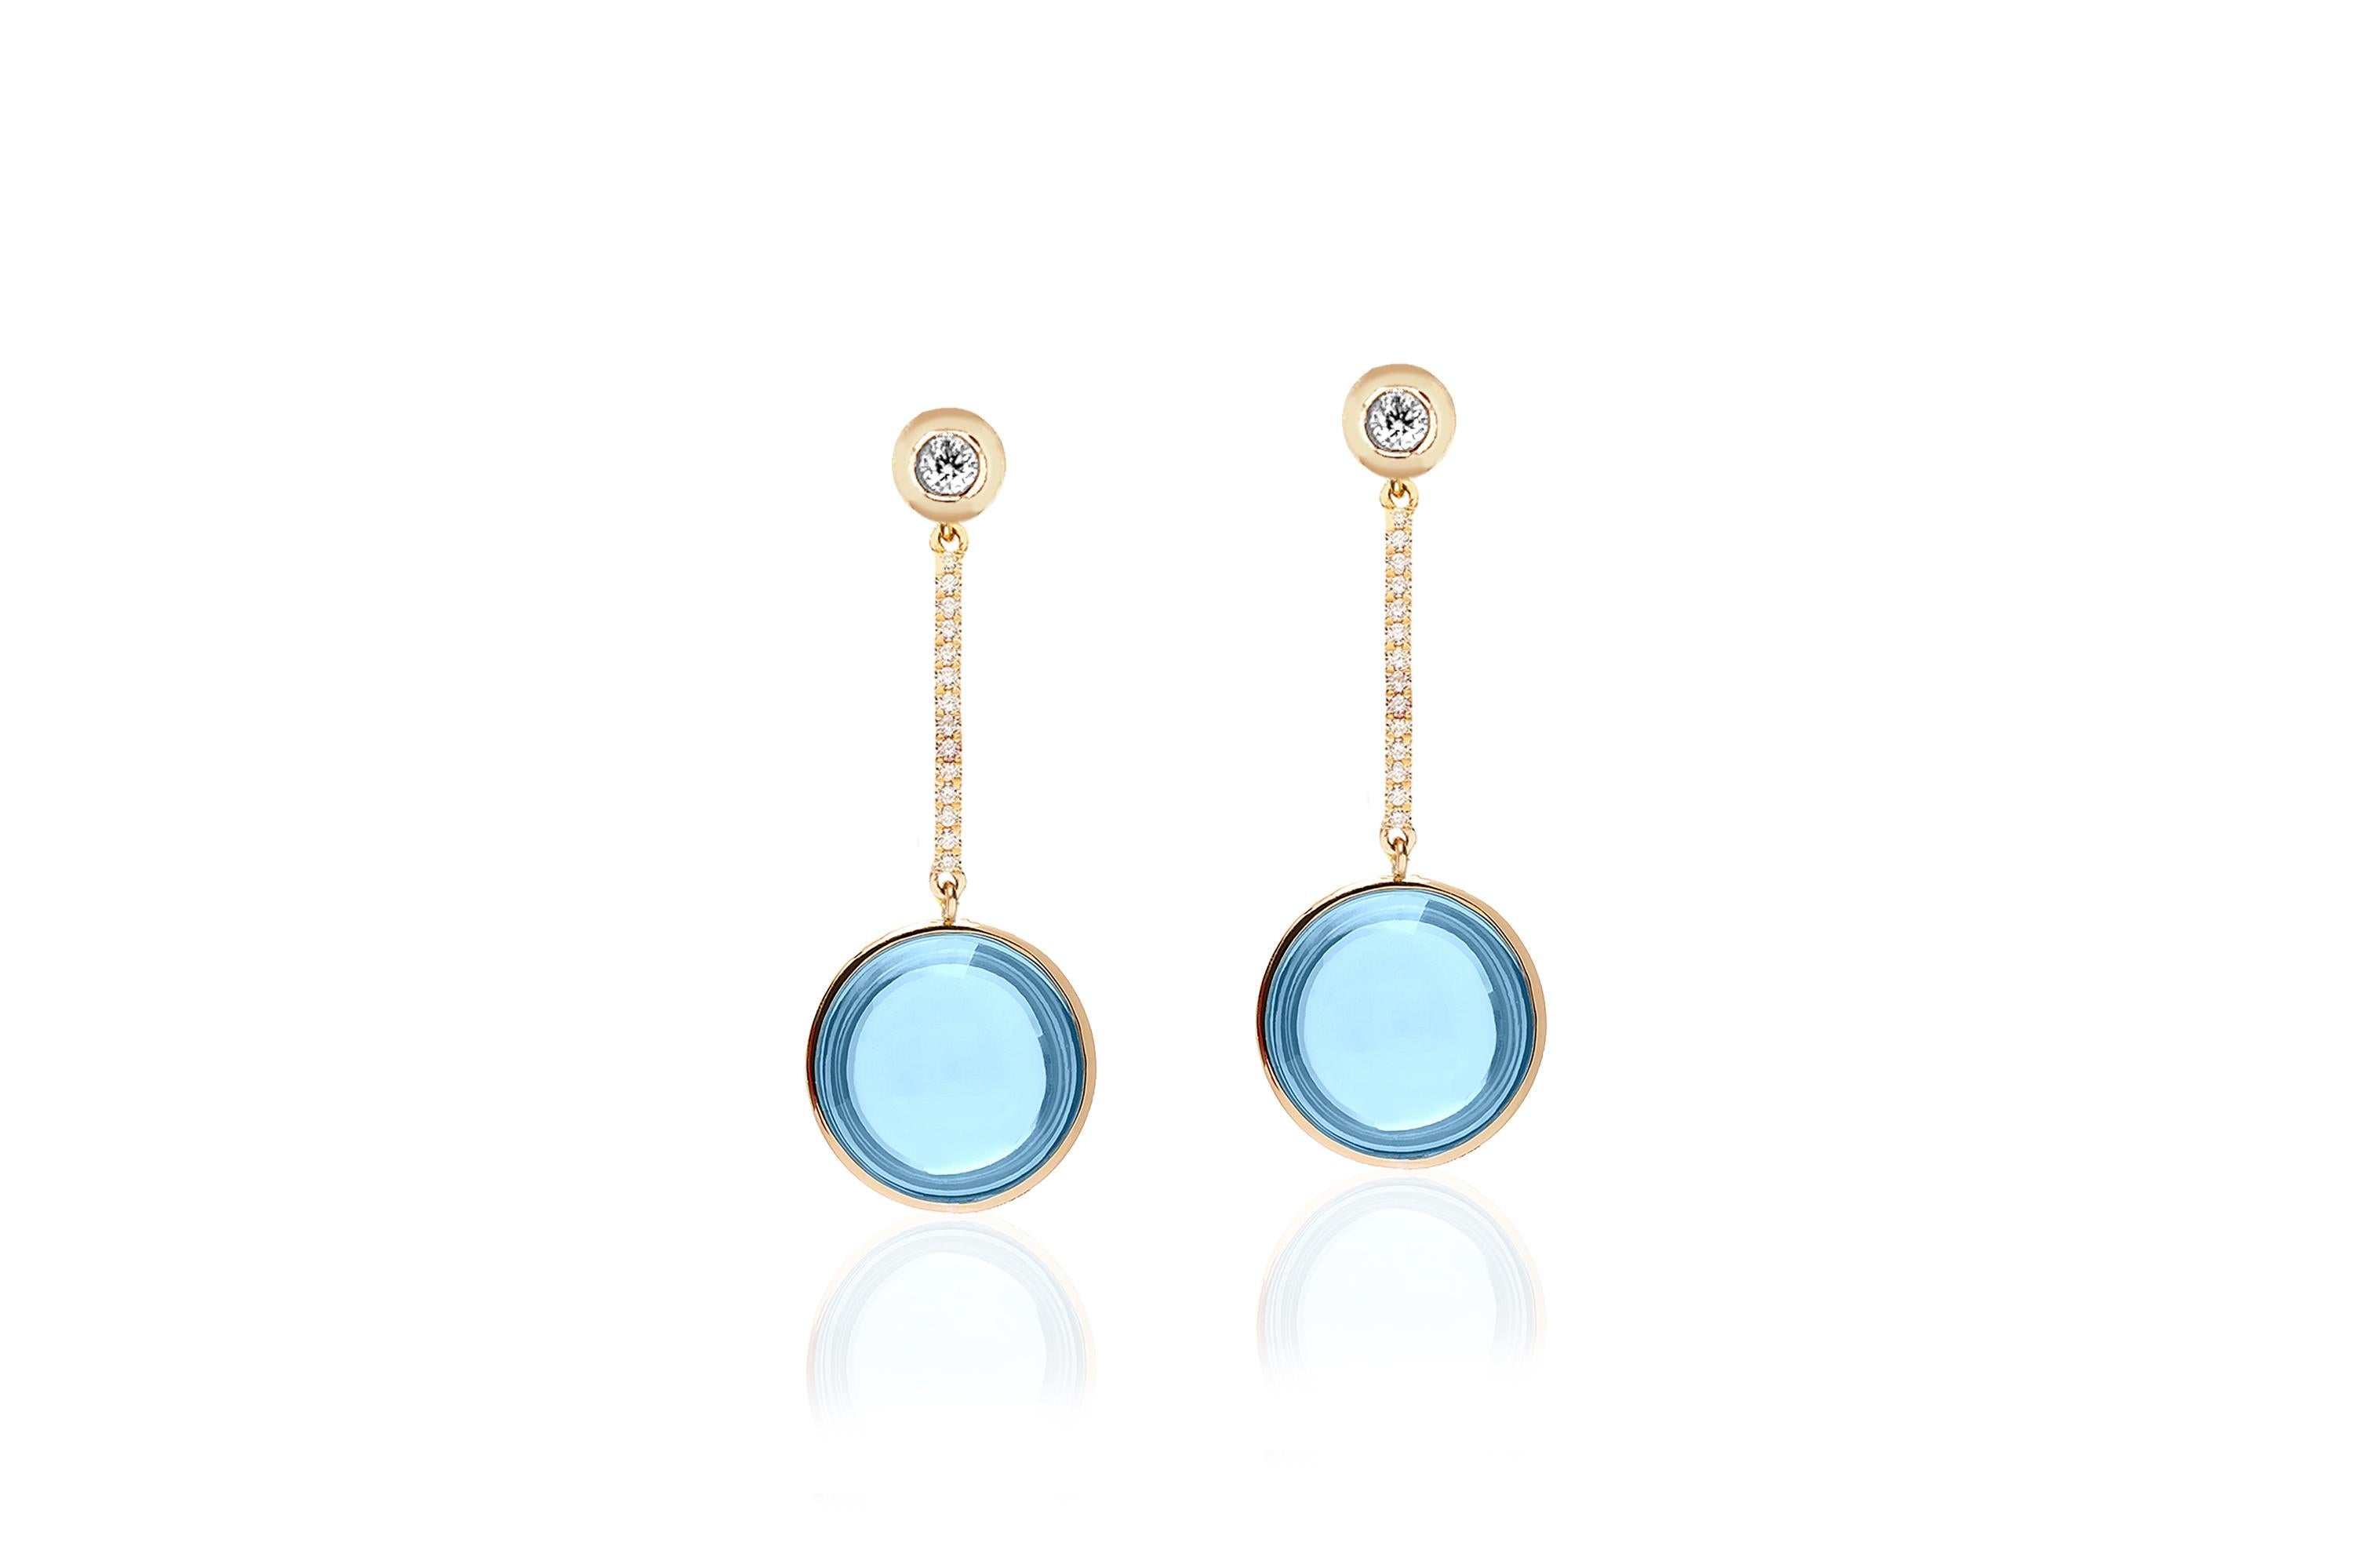 The Blue Topaz Disc Earring with Diamonds in 18K Yellow Gold is a stunning piece of jewelry from the exclusive 'G-One' Collection. Crafted with precision and elegance, these earrings feature a round disc-shaped blue topaz gemstone as the